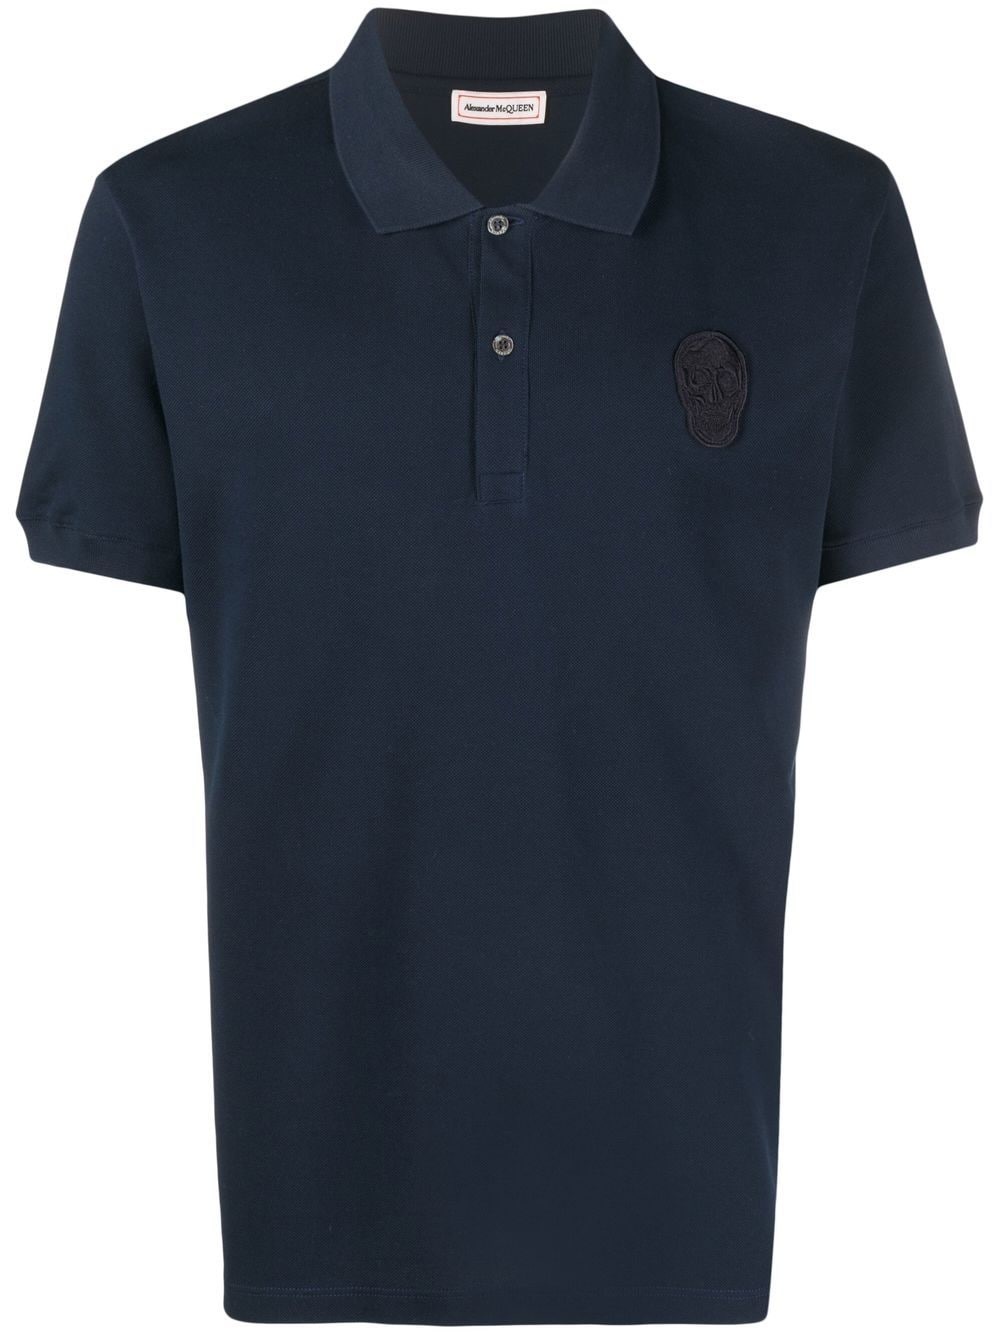 skull-patch polo shirt - 1